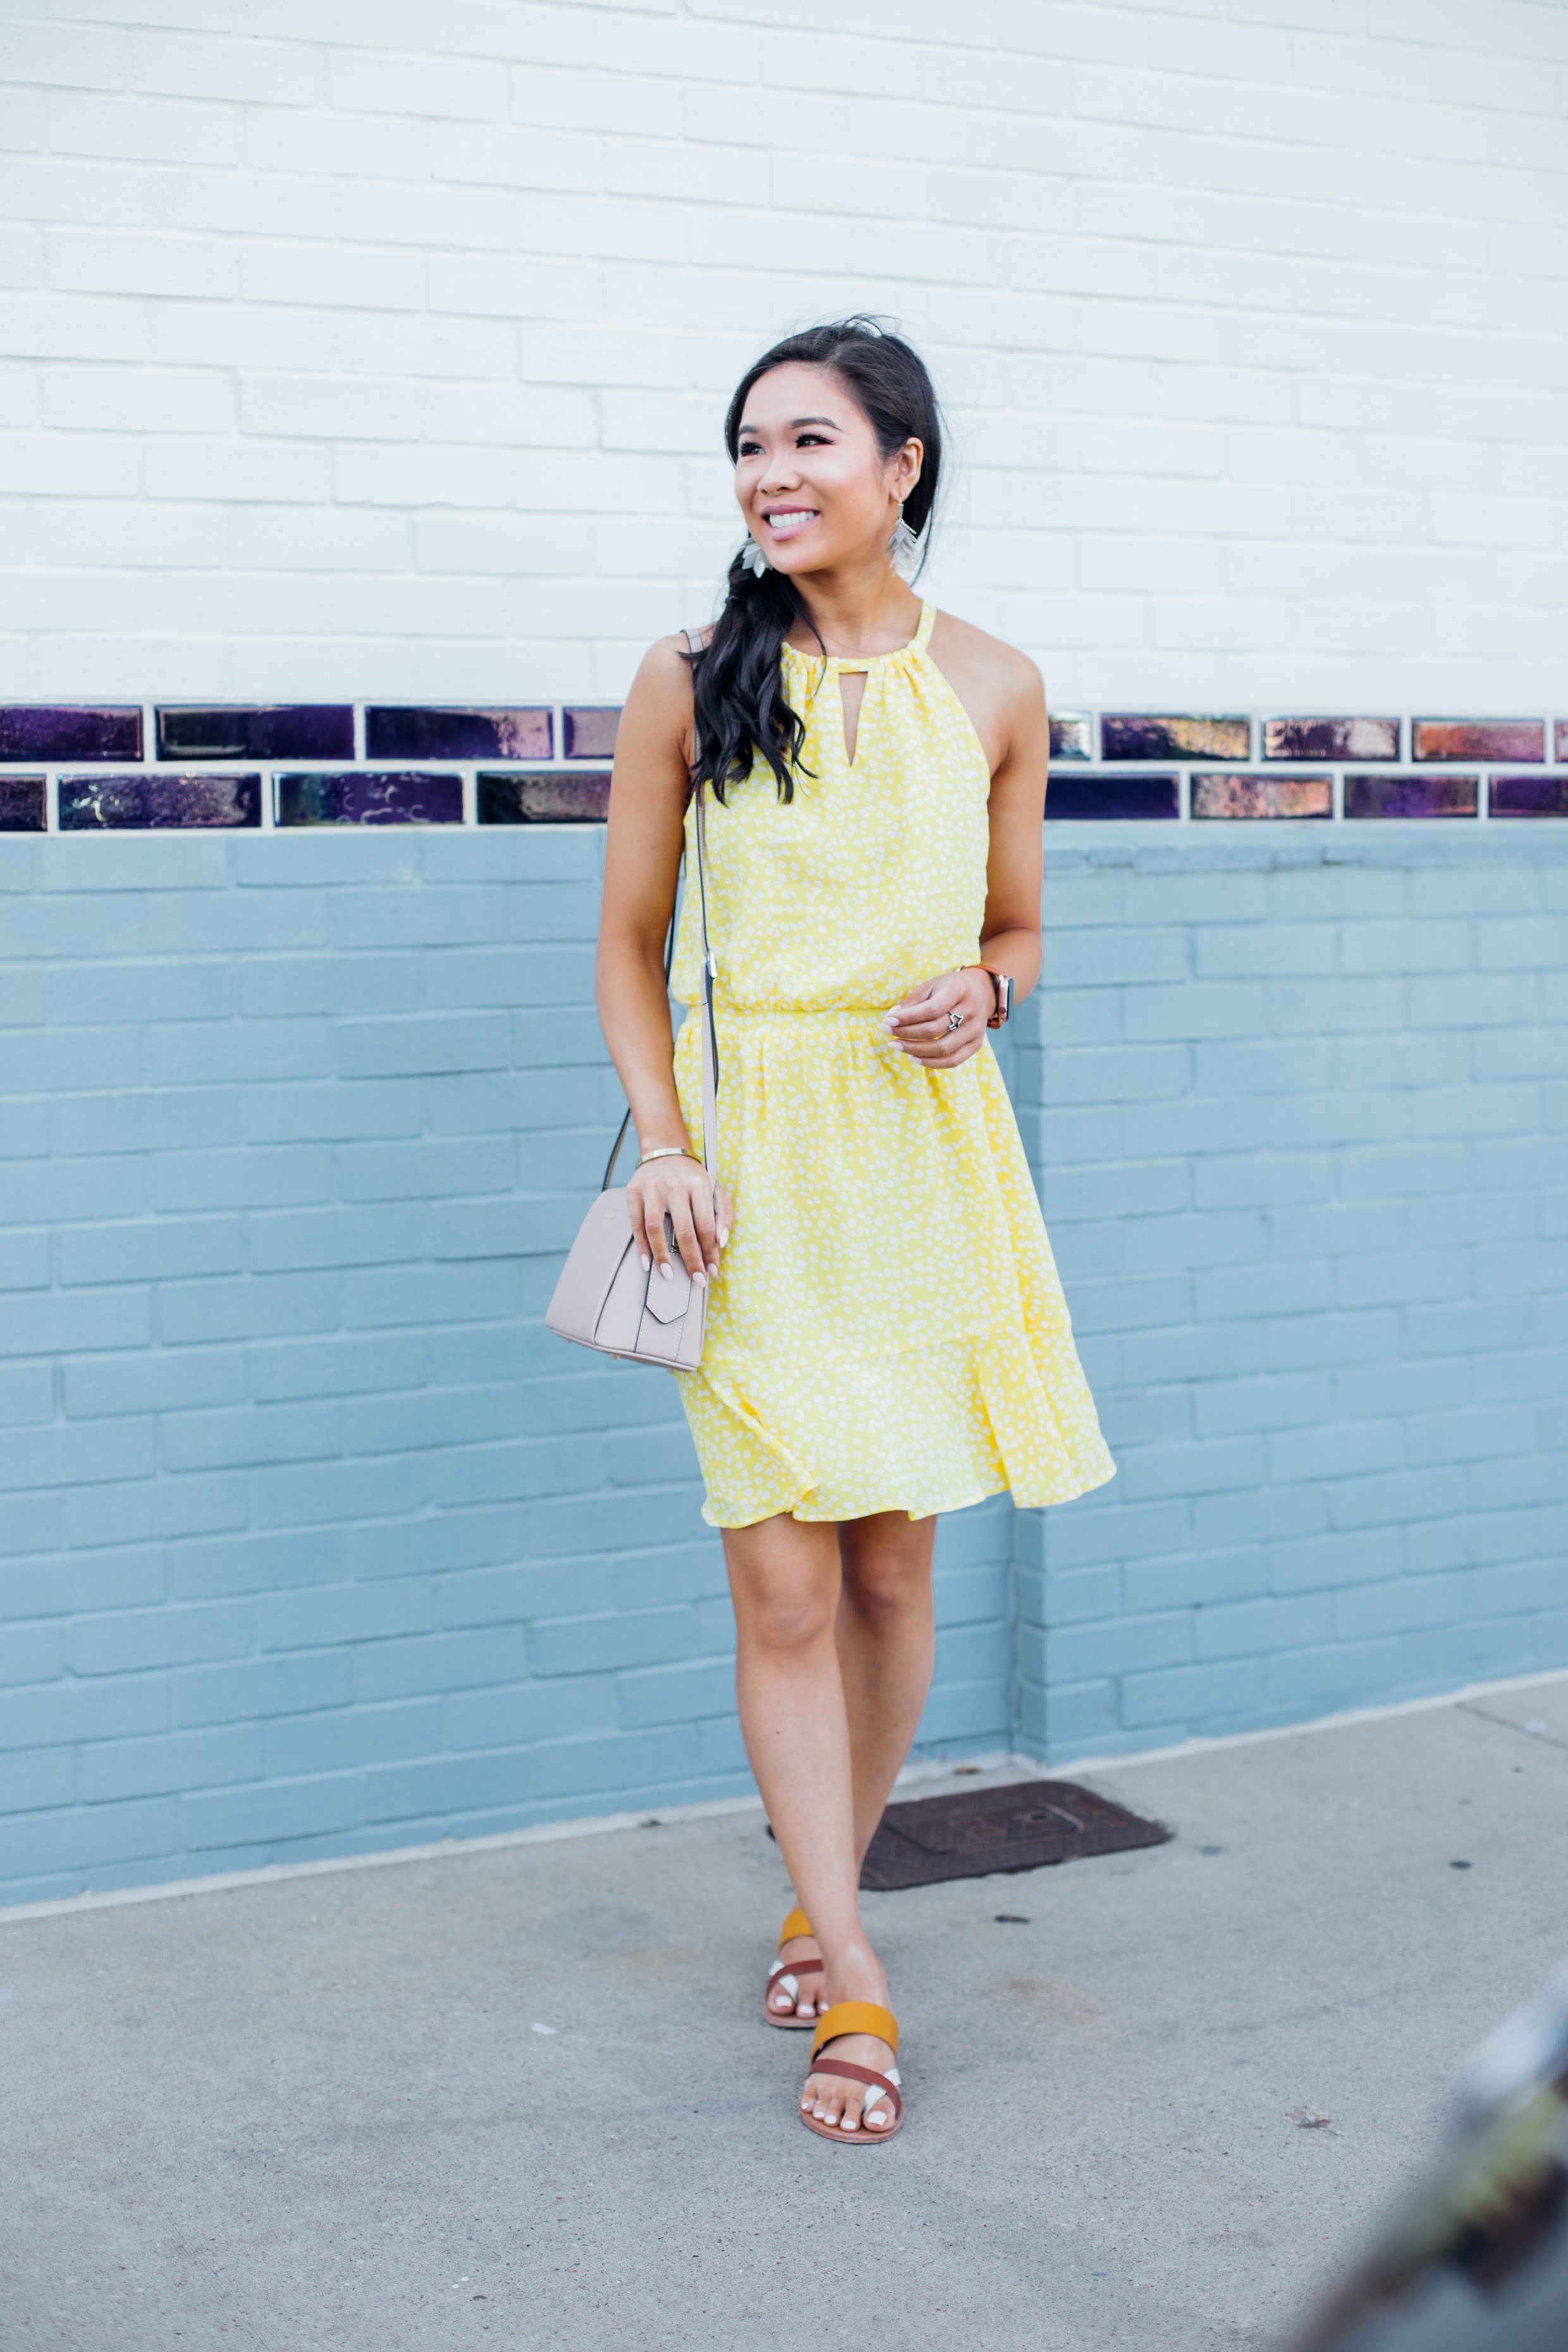 Blogger Hoang-Kim shares how to wear yellow